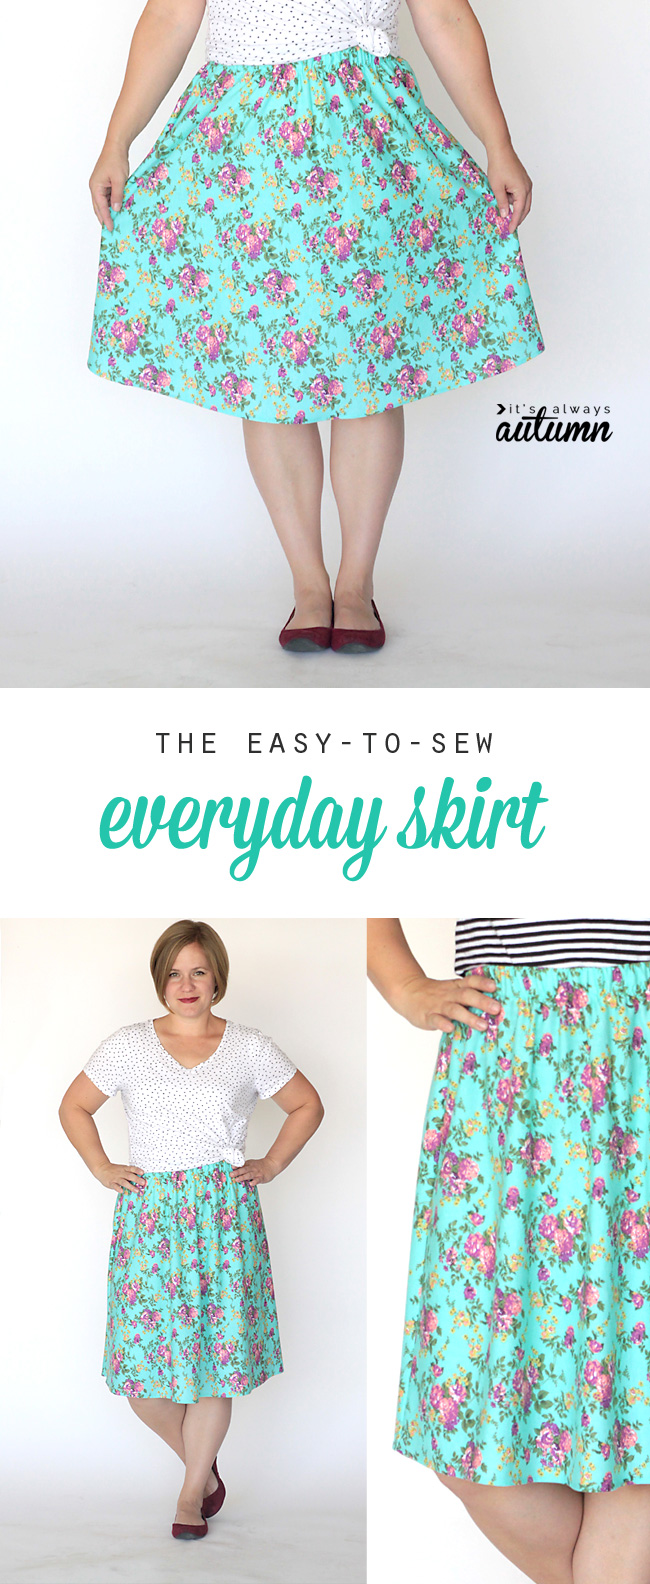 the everyday skirt simple sewing tutorial - It's Always Autumn